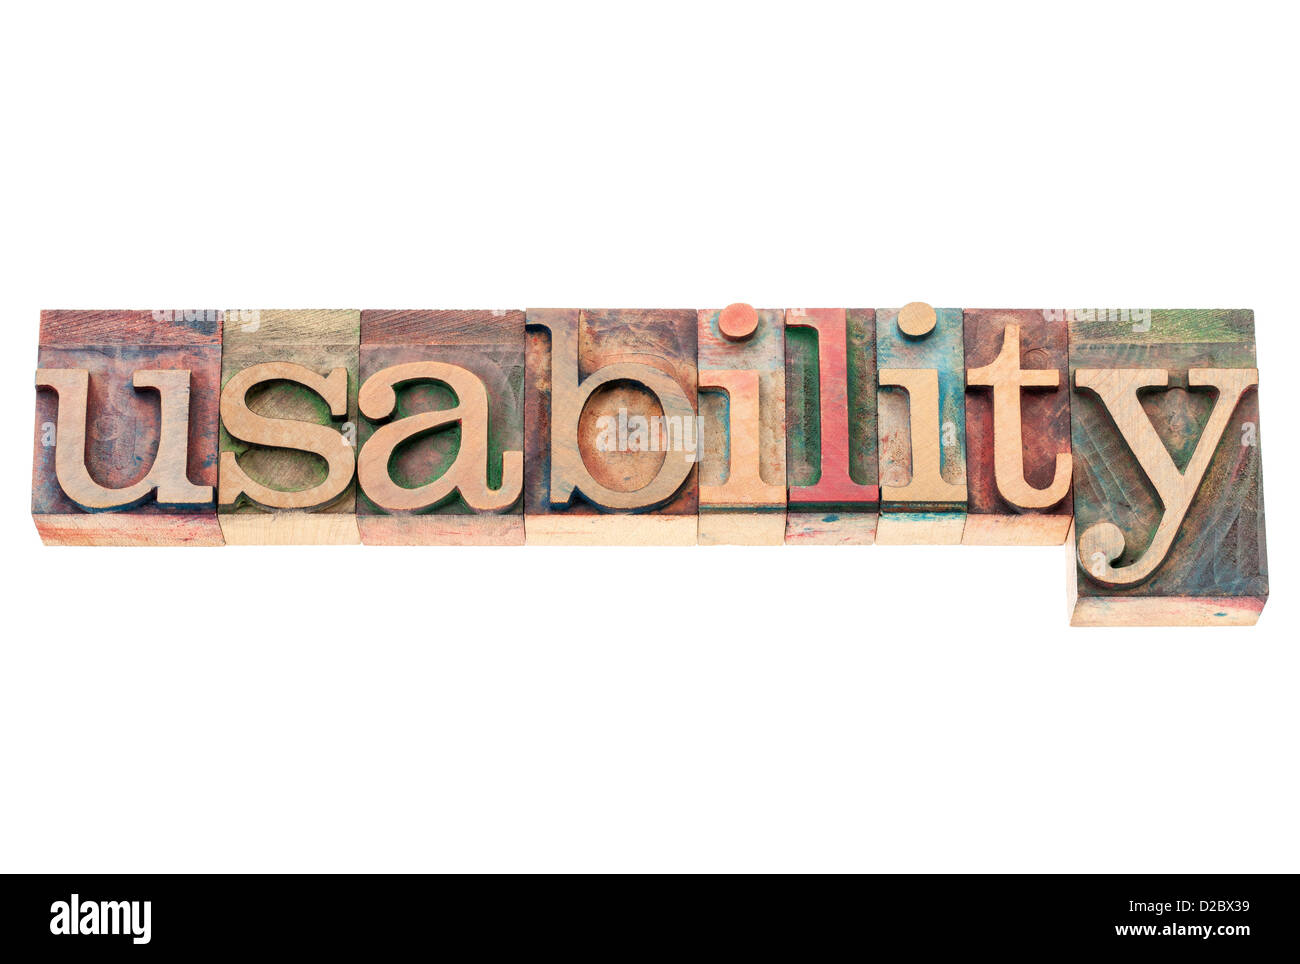 usability word - user friendly concept - isolated text in vintage letterpress wood type printing blocks Stock Photo